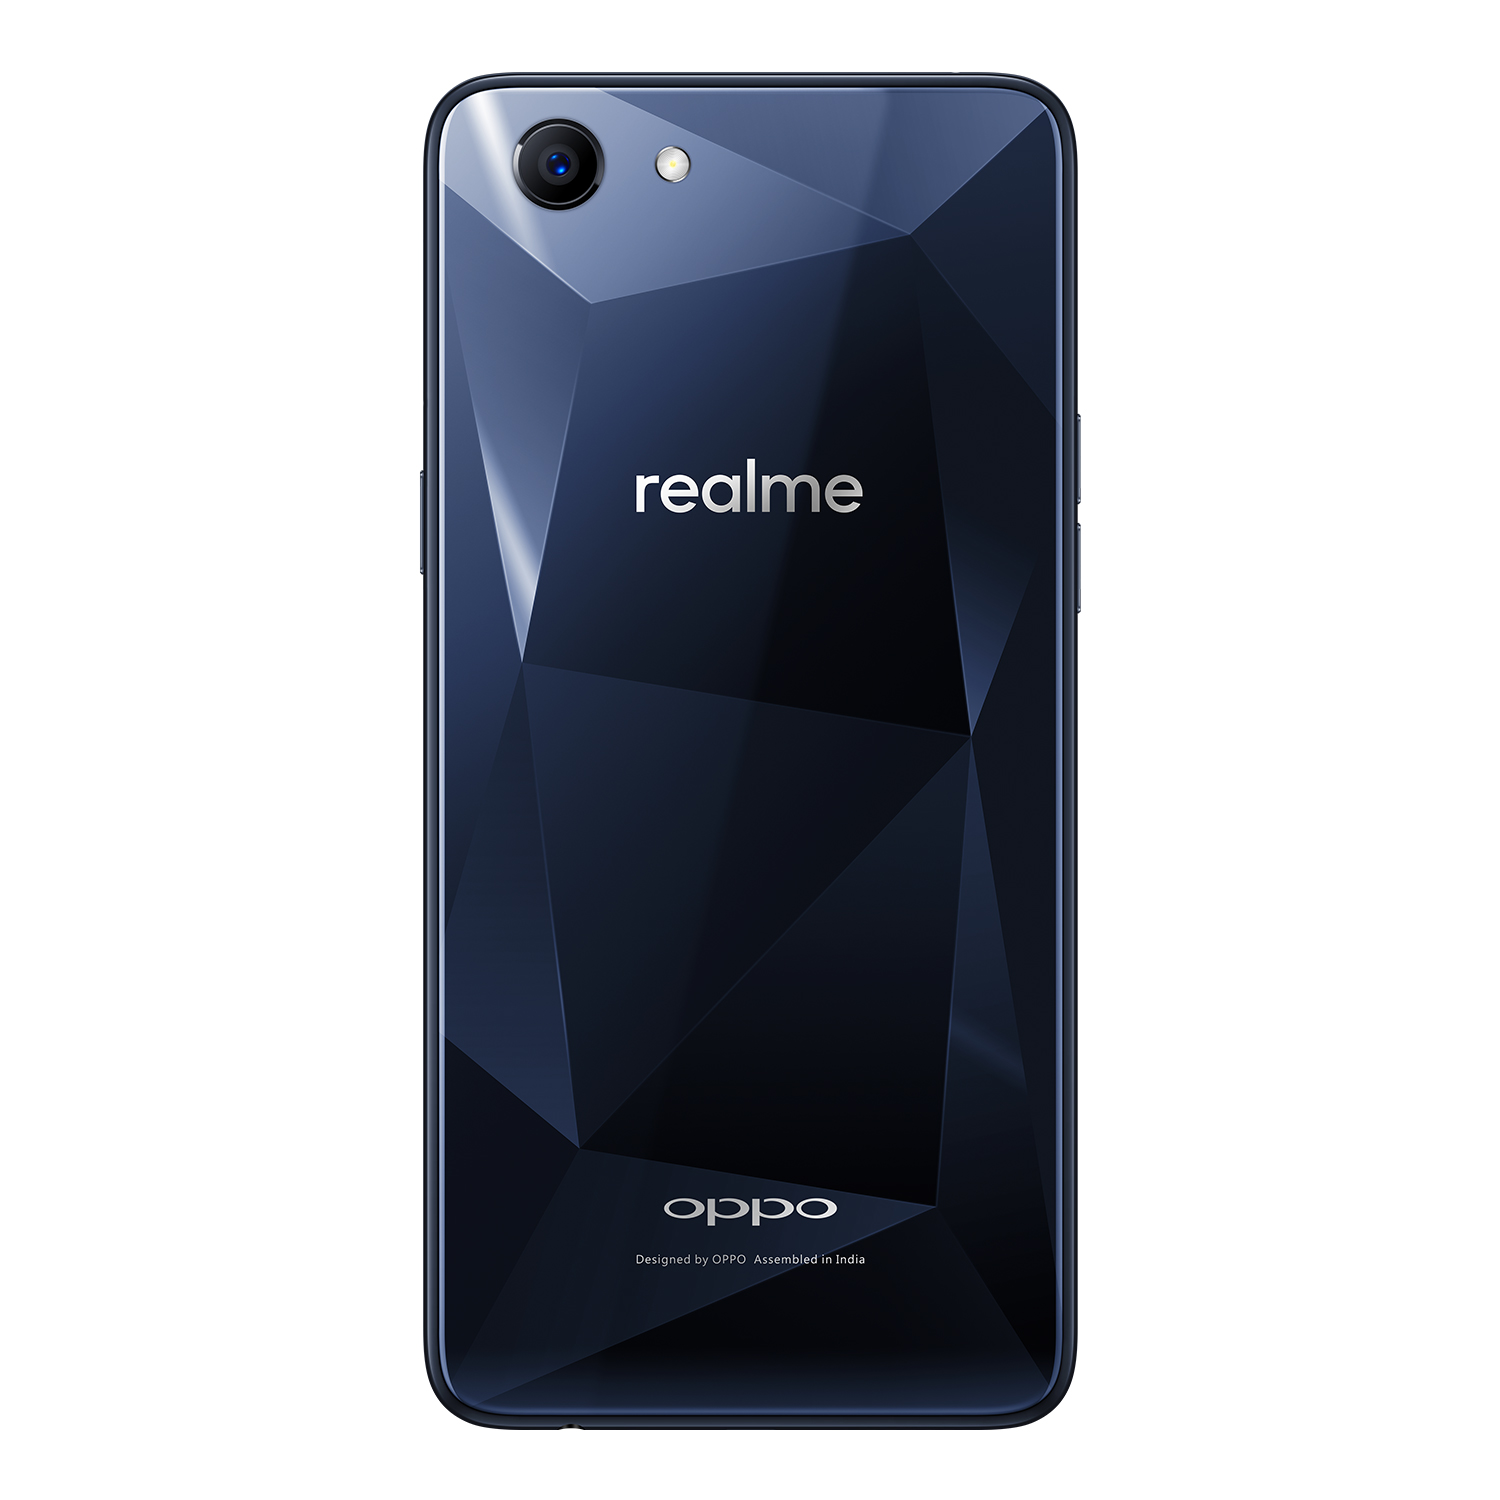 Oppo Launches Realme 1 with 6 inch FHD+ Display, up to 6GB RAM, Helio P60 Processor, Starting at